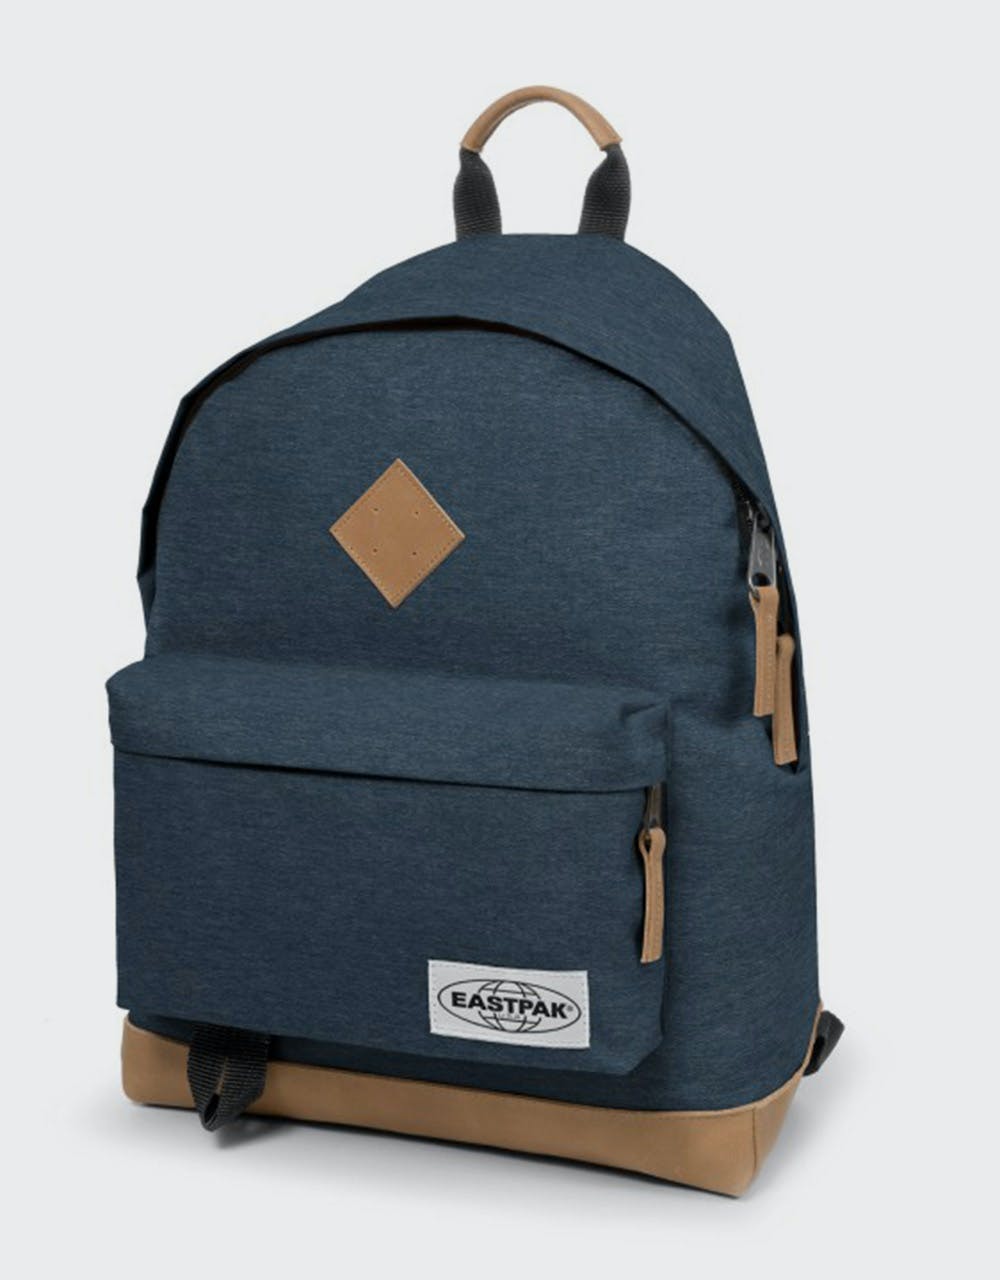 Eastpak Wyoming Backpack - Into Navy Yarn – Route One